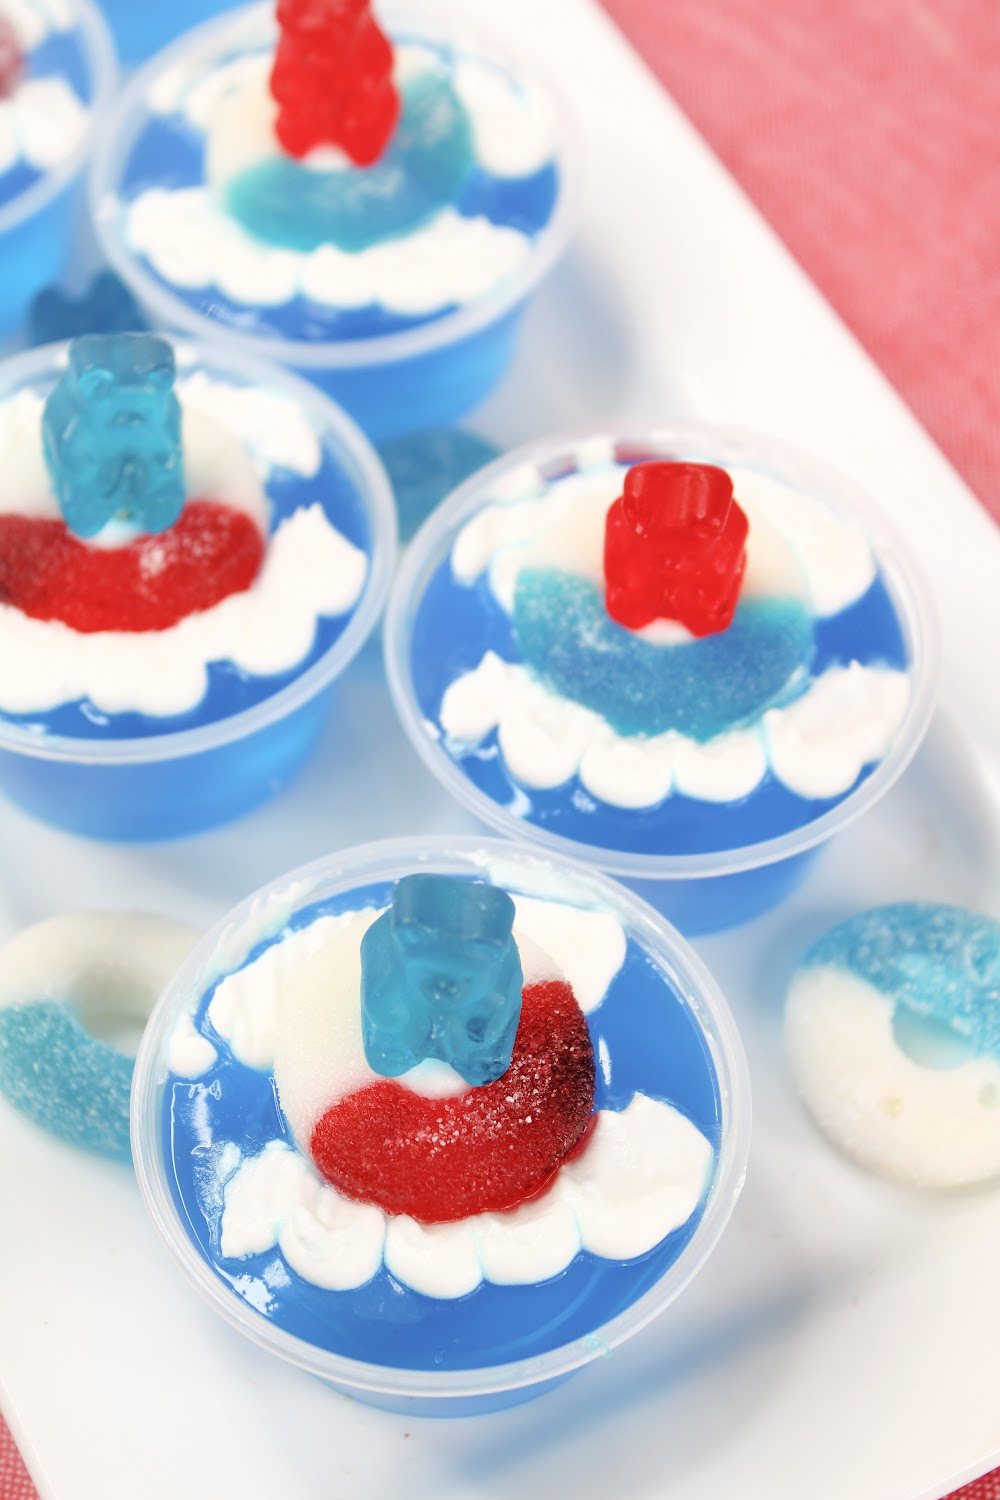 Fun pool party jello shots using gummy bears in red, white and blue!